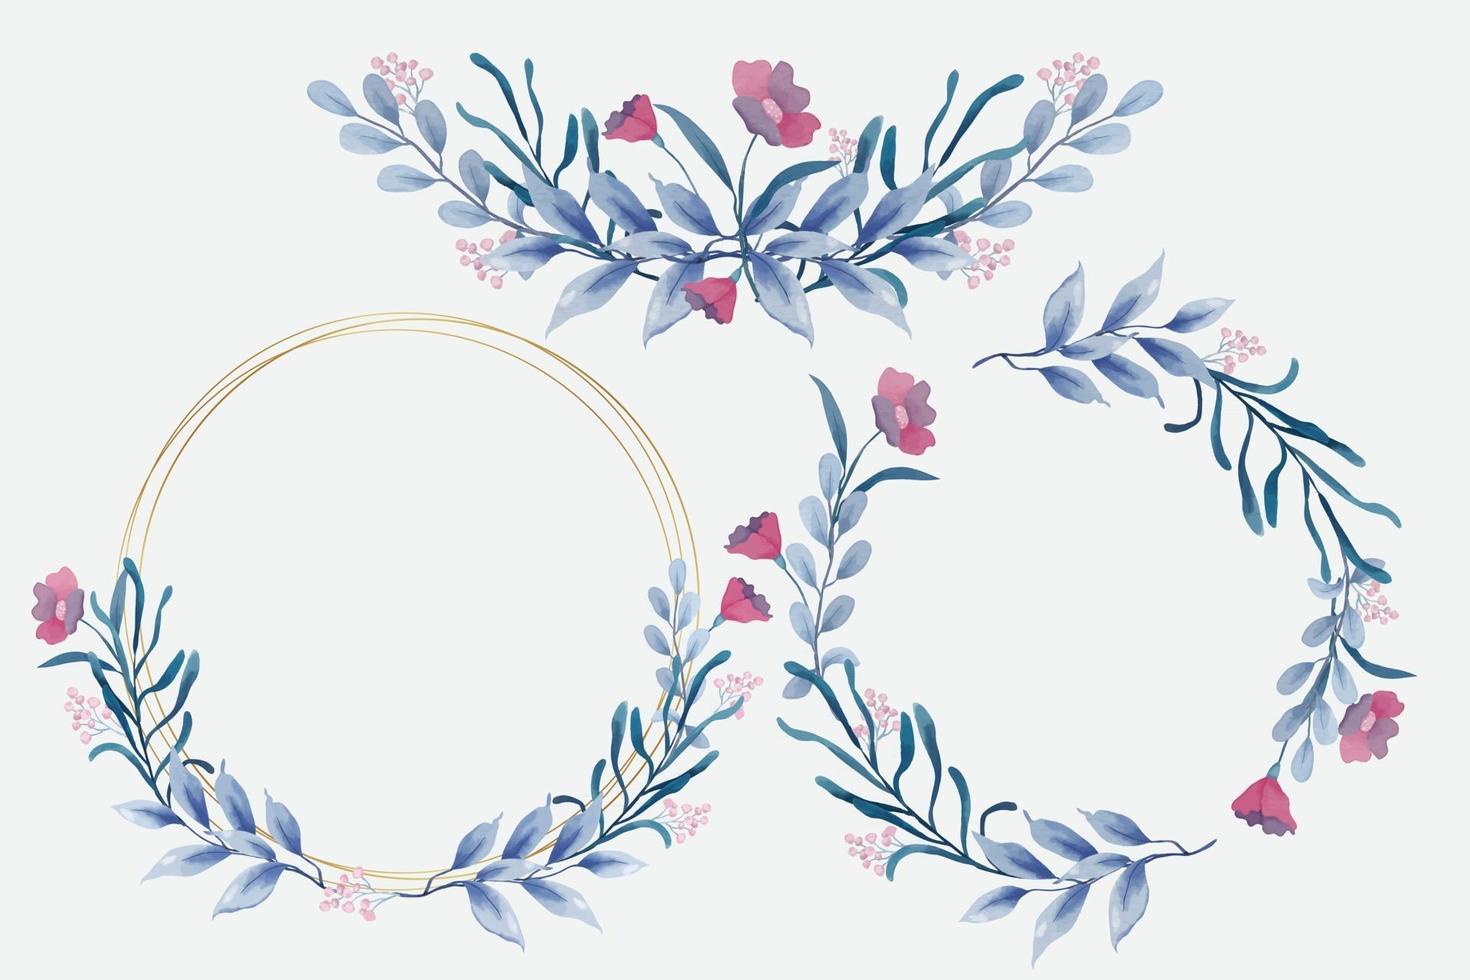 Blue Floral Frames in Watercolor Style vector